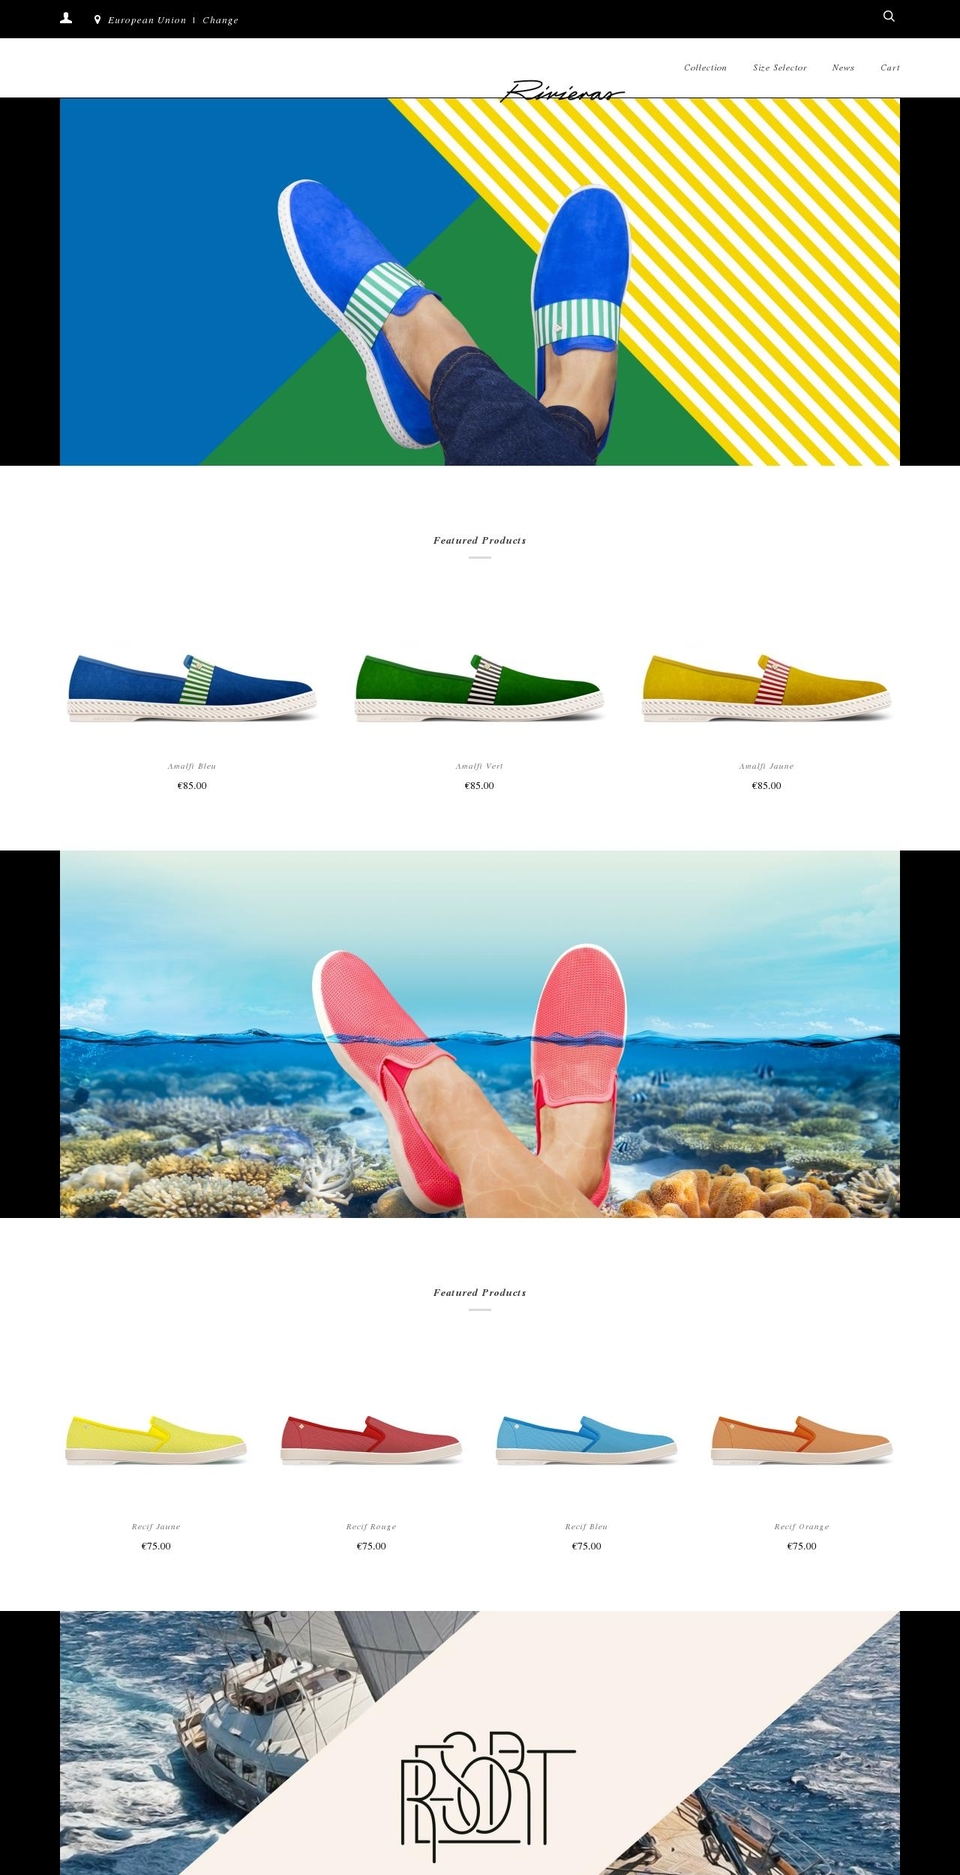 Rivieras [Plus]-TH-July-30-2018 Shopify theme site example rivieras-resort.info